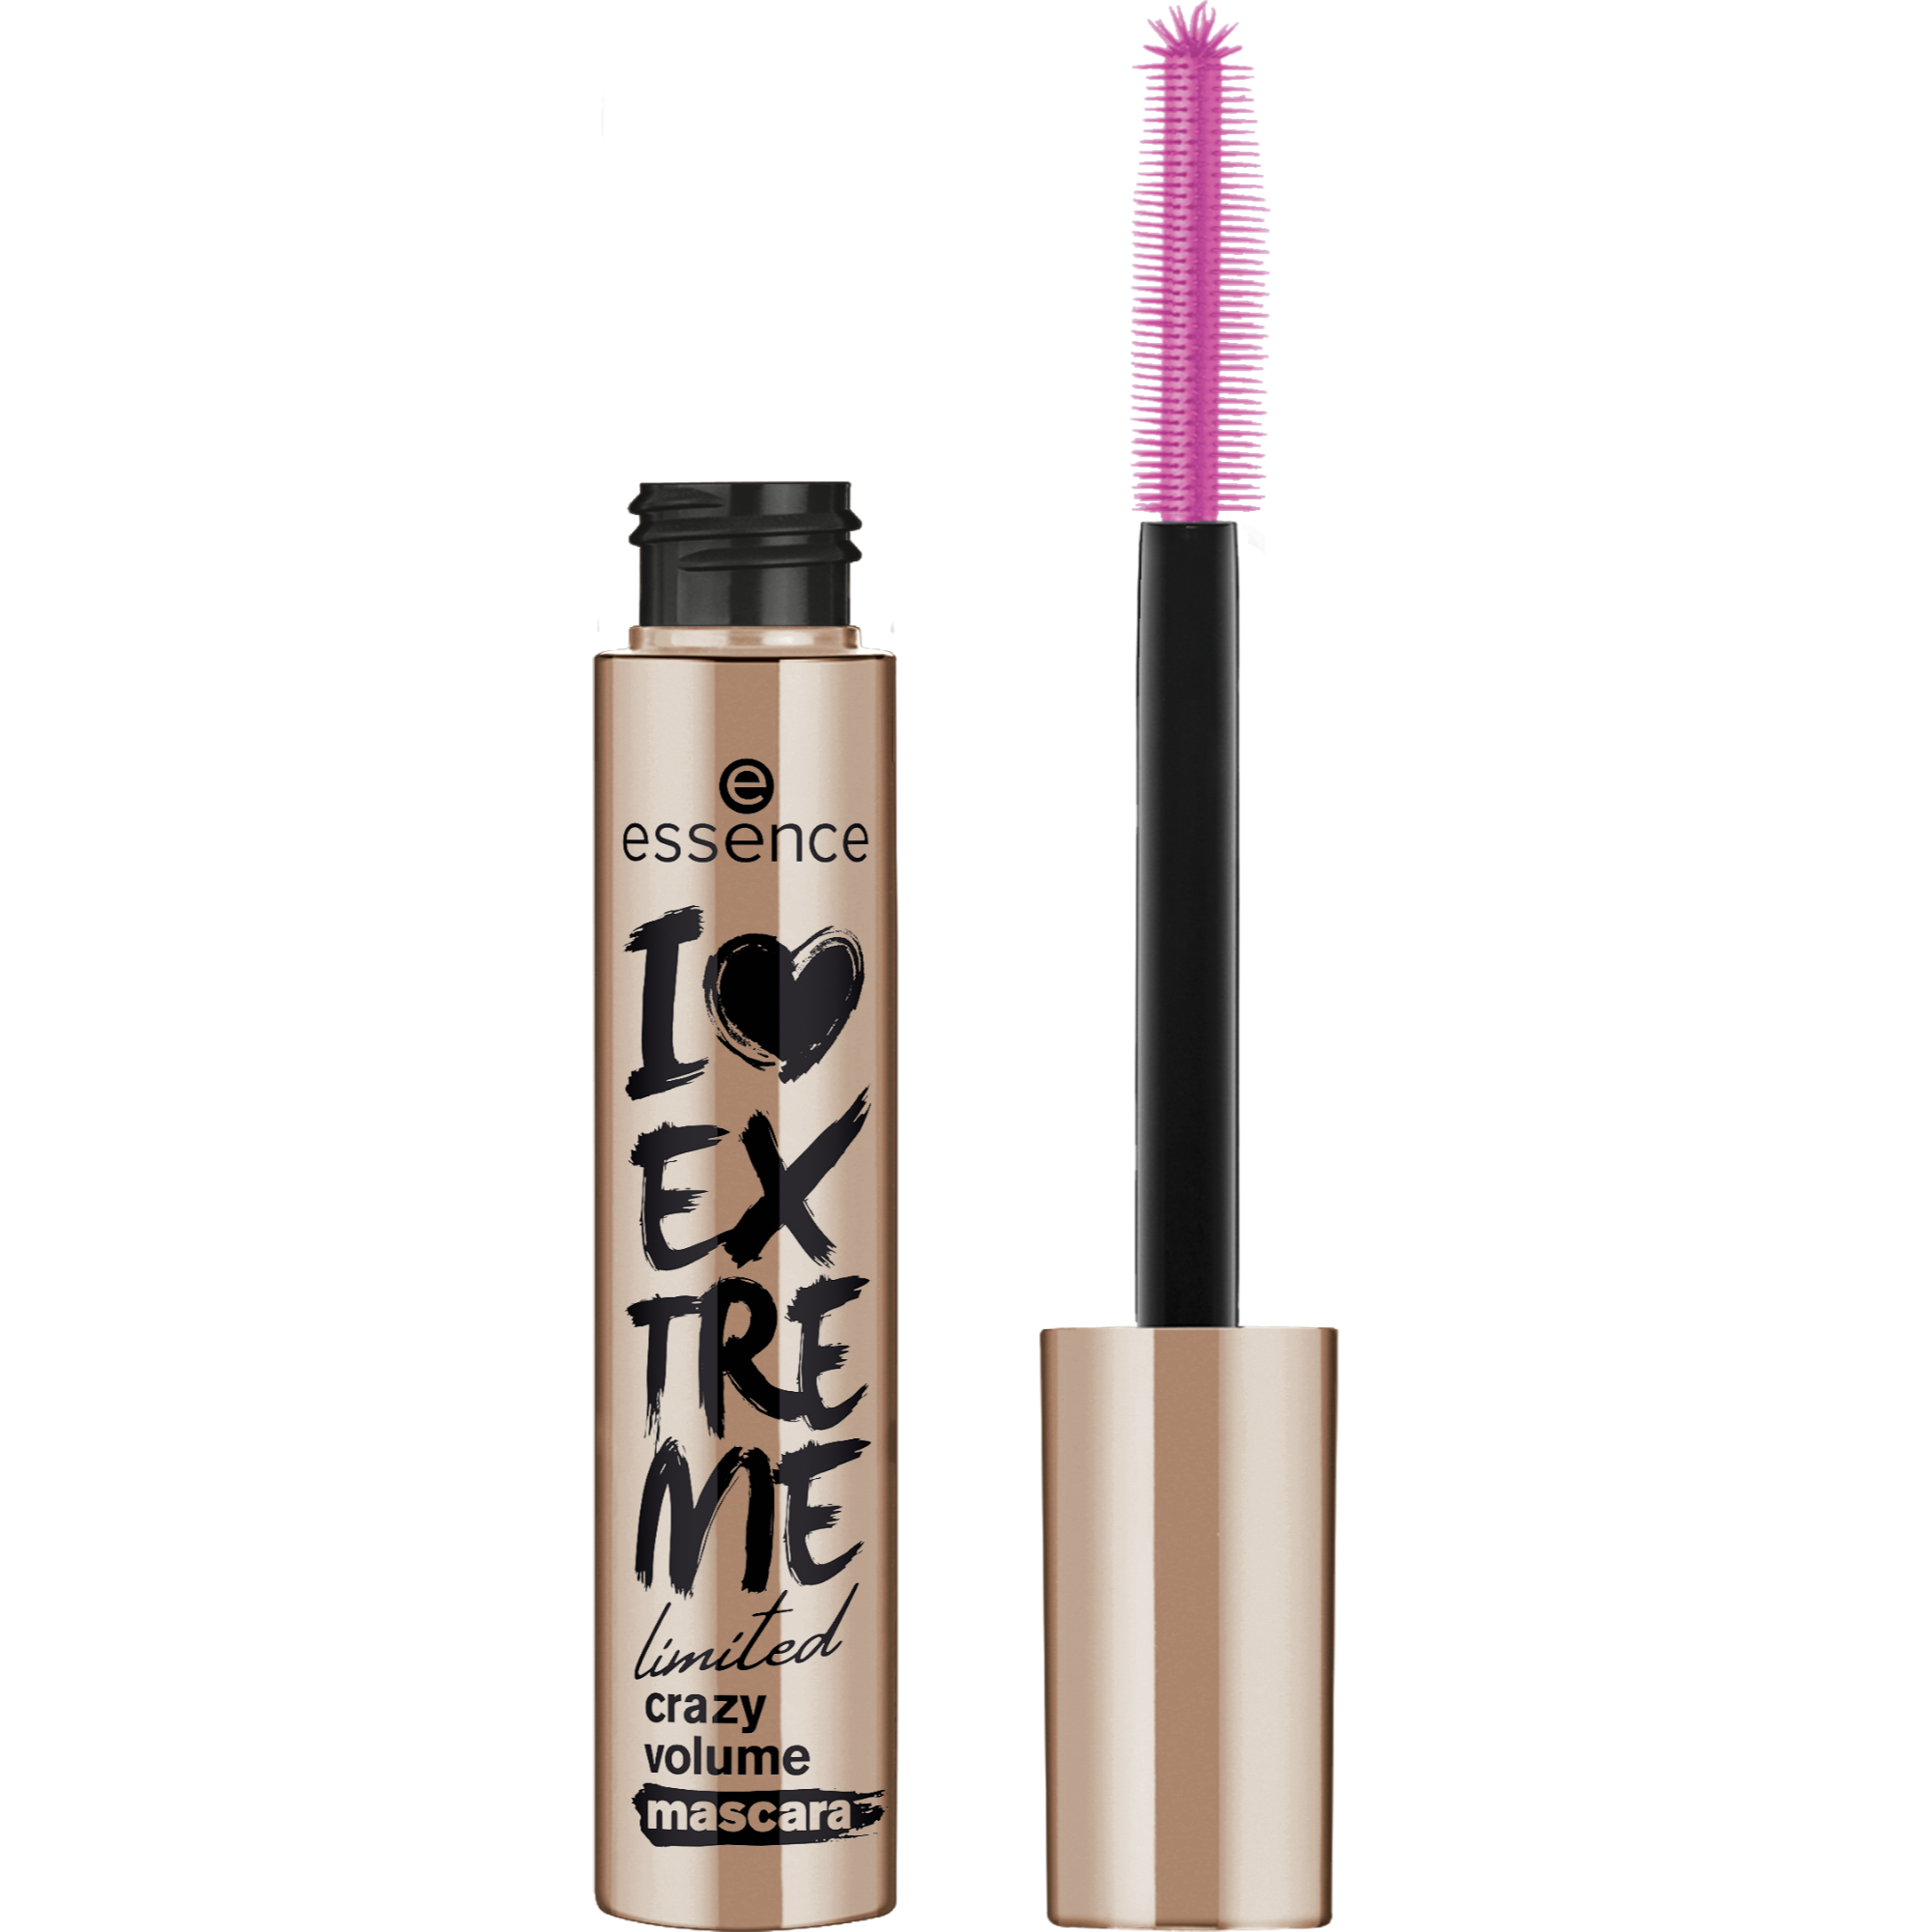 the glowin' golds I LOVE EXTREME limited crazy volume mascara